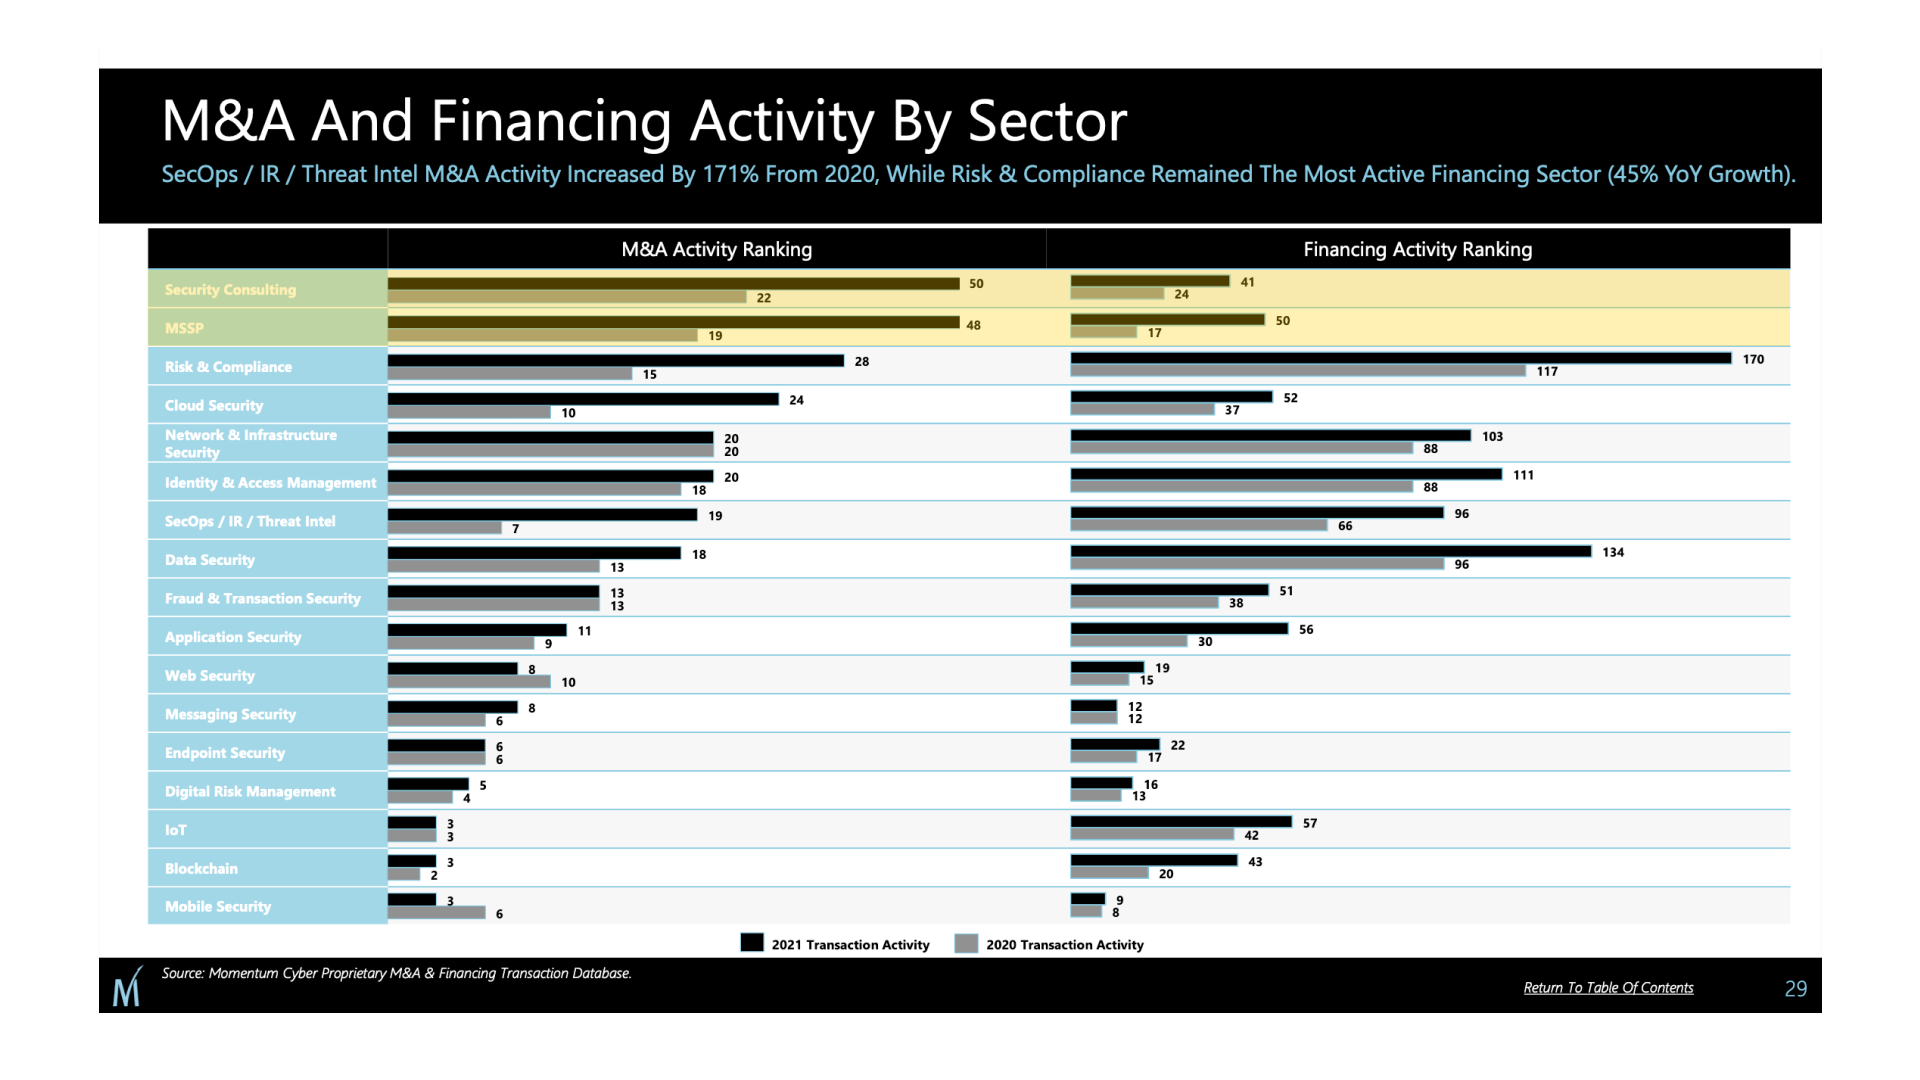 M&A and financing activity by sector.